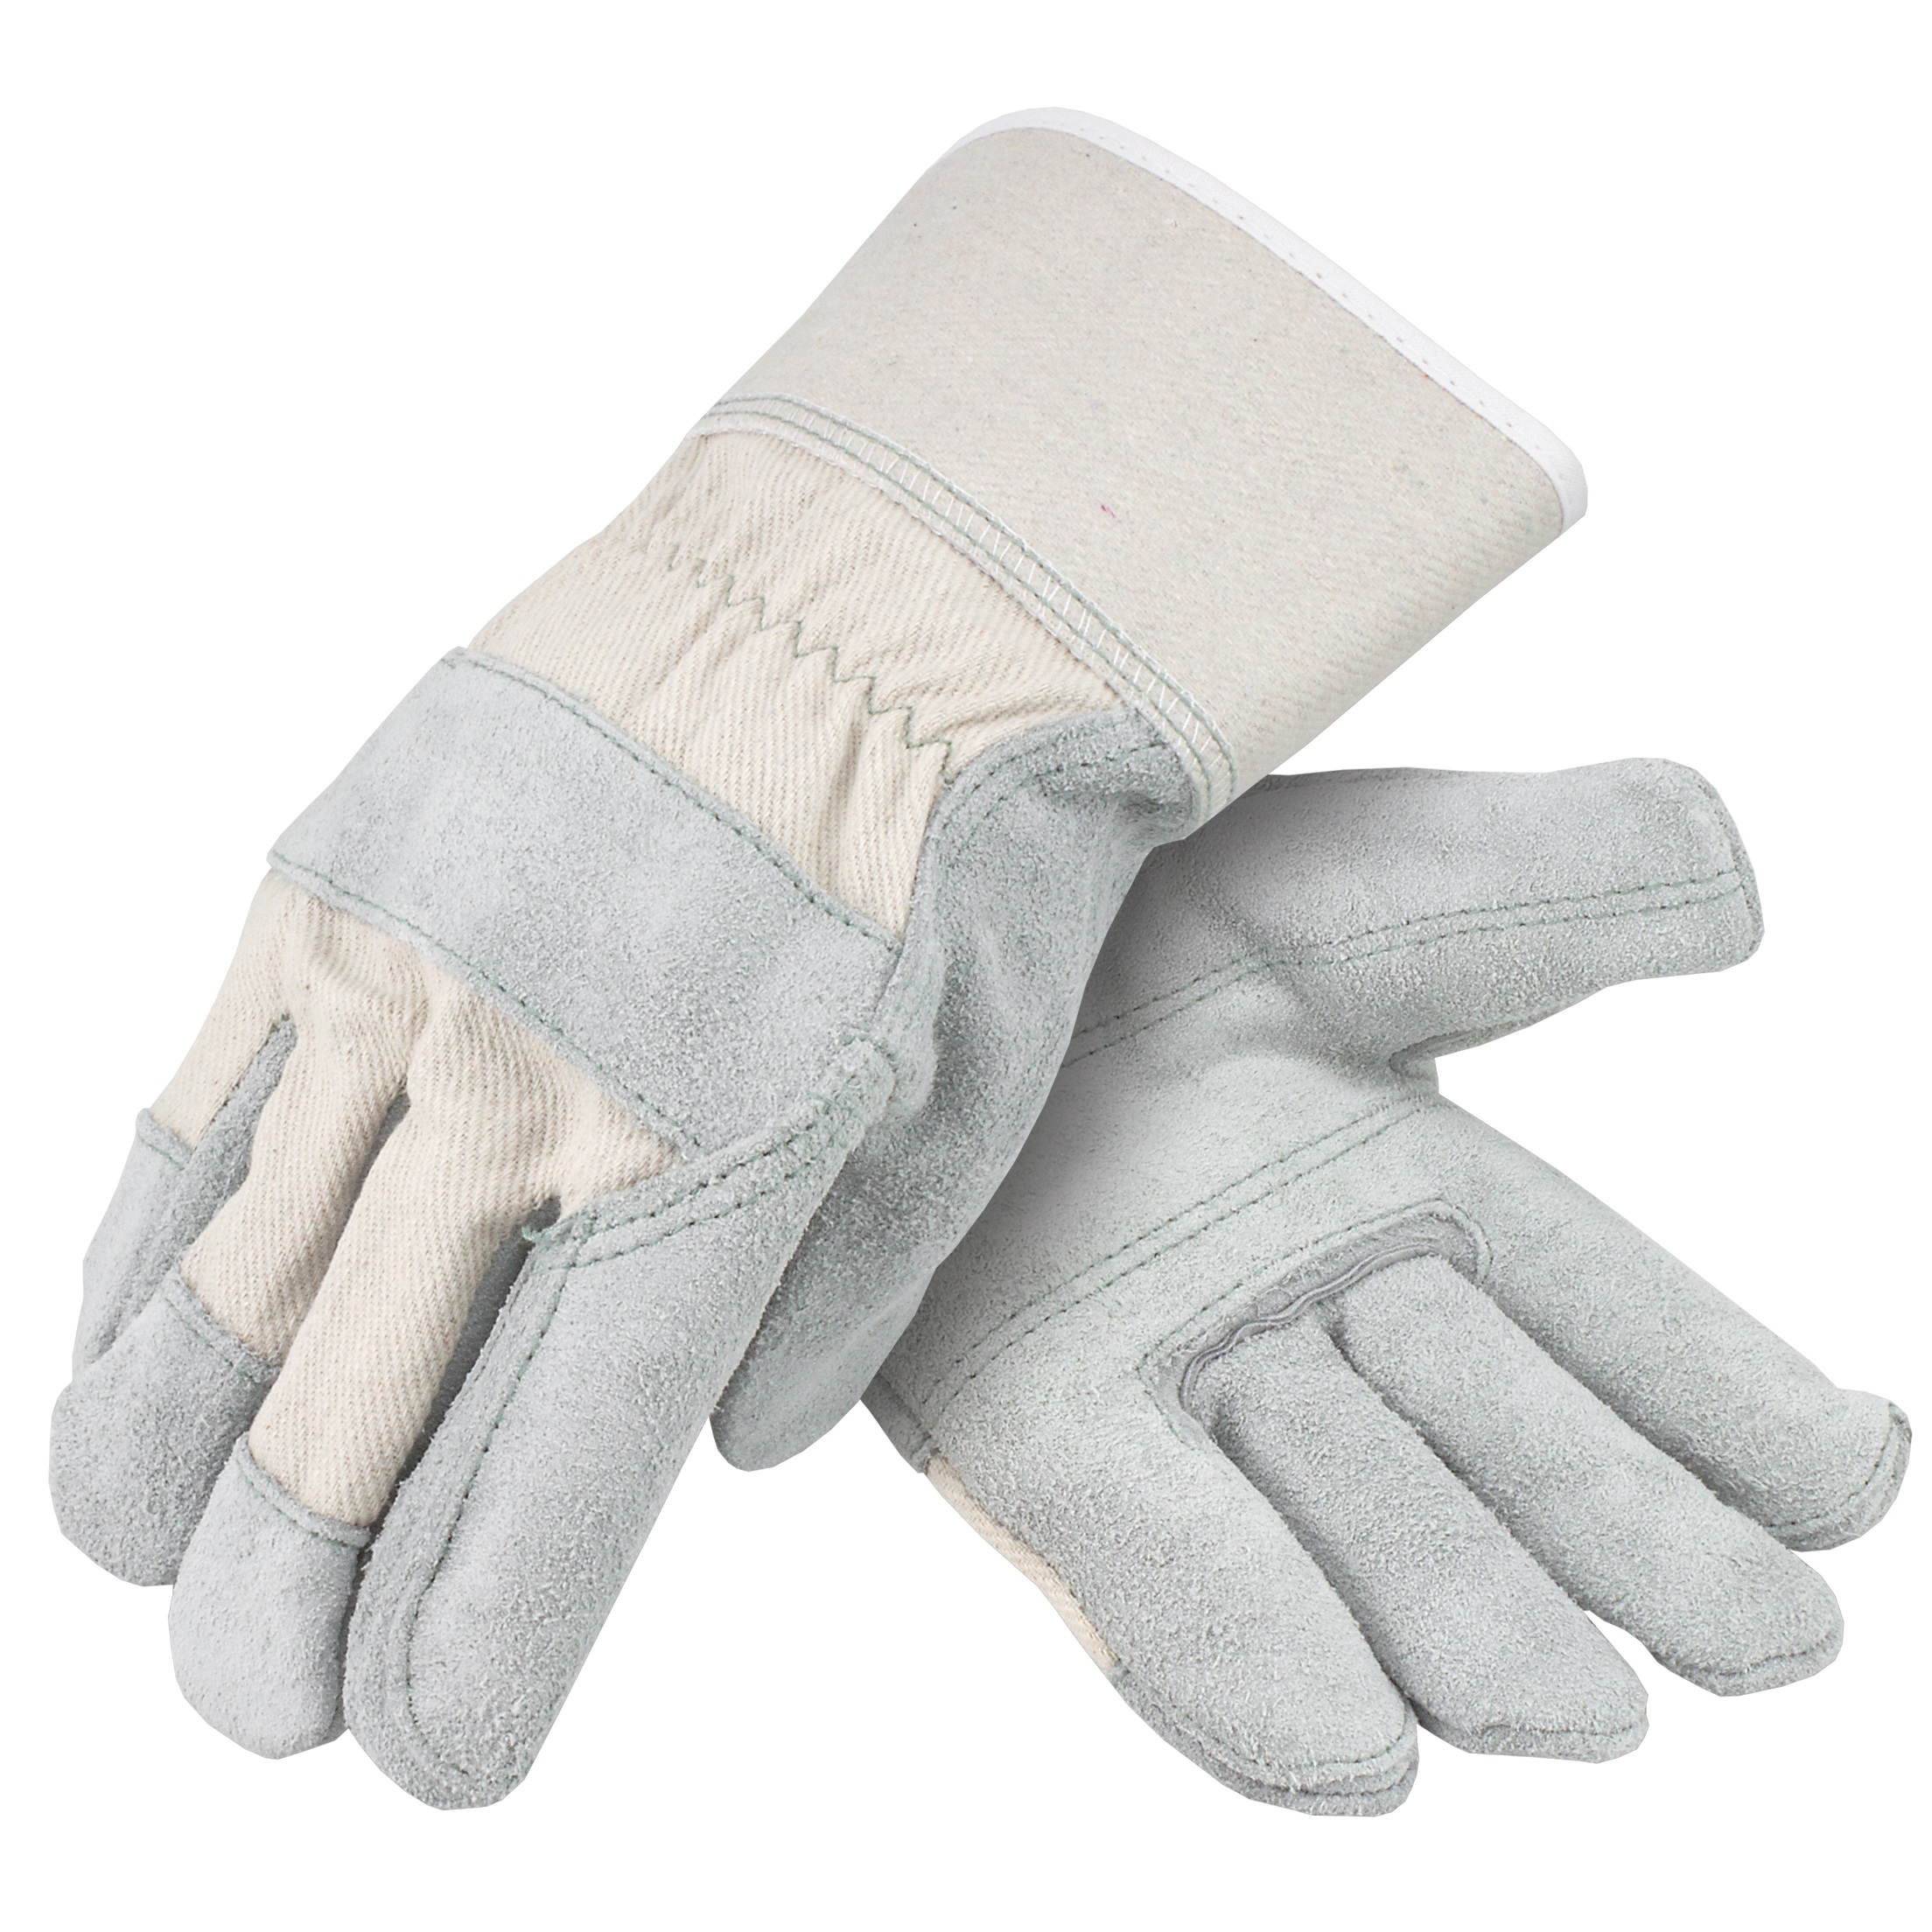 Select Leather Double Palm Gloves with White Back, Safety Cuff